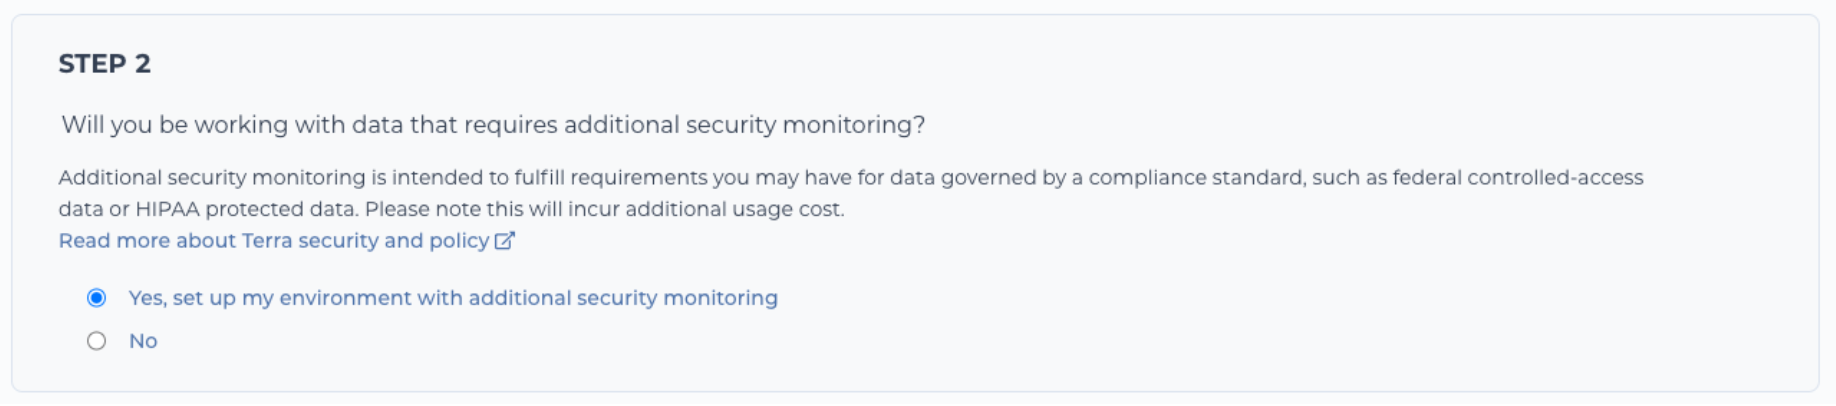 step 2 of the create billing project process asks will you be working with data that requires additional security monitoring? Additional security monitoring is intended to fulfill requirem,ents you may have for data governed by a compliance standard, such as federal controlled-access data or HIPAA-protected data. Please note this will incur additional usage cost and radio buttons for yes, set up my evnironment withadditional security monitoring and no